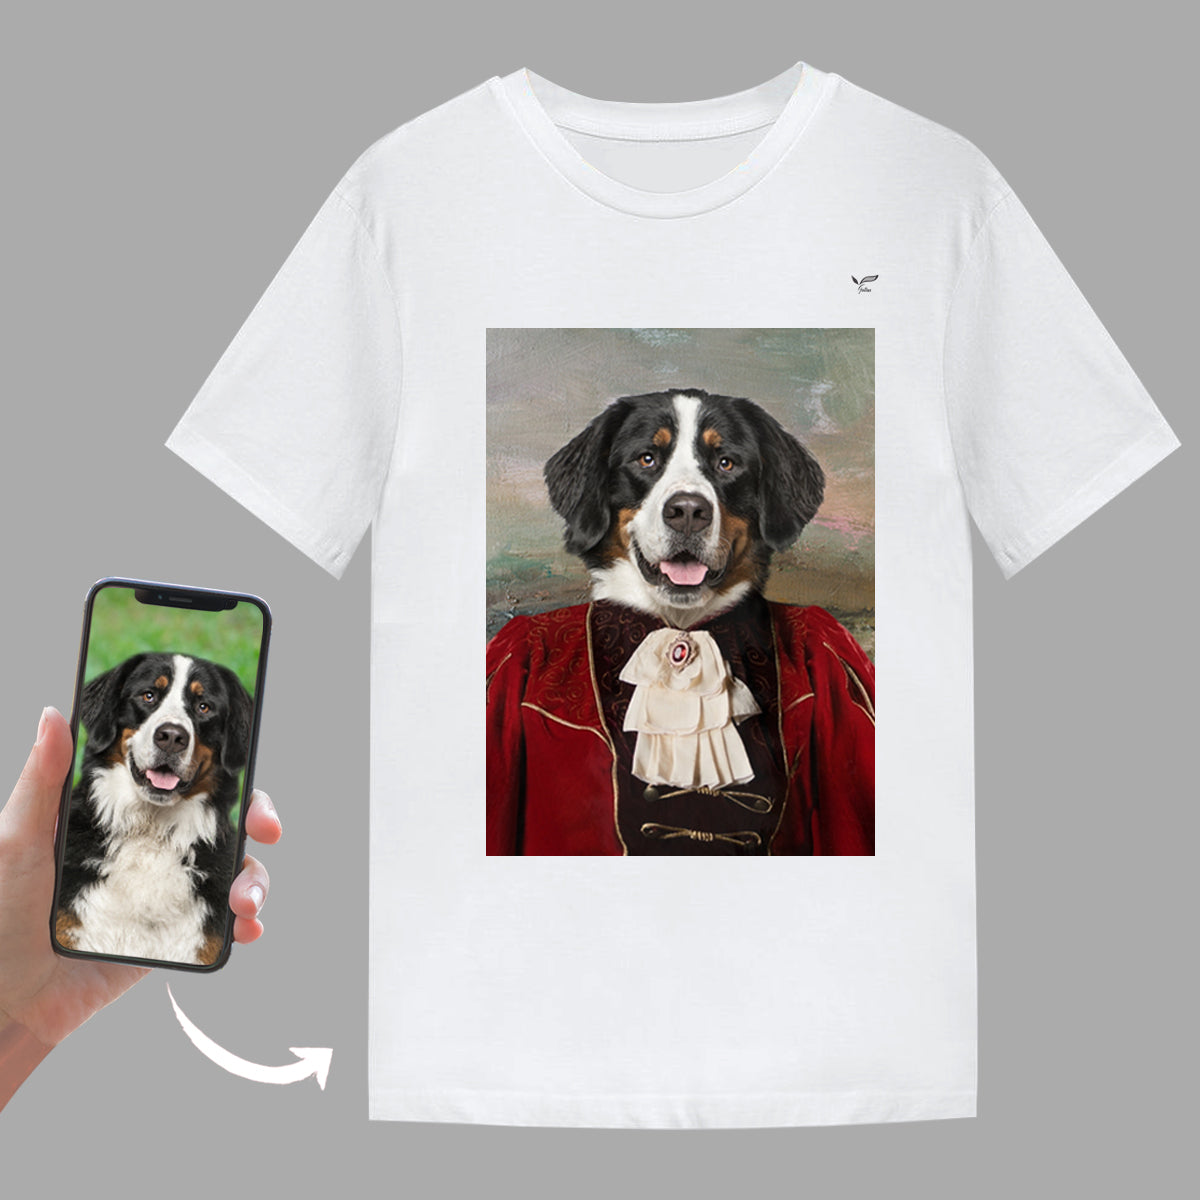 The Aristocrat - Personalized T-Shirt With Your Pet's Photo